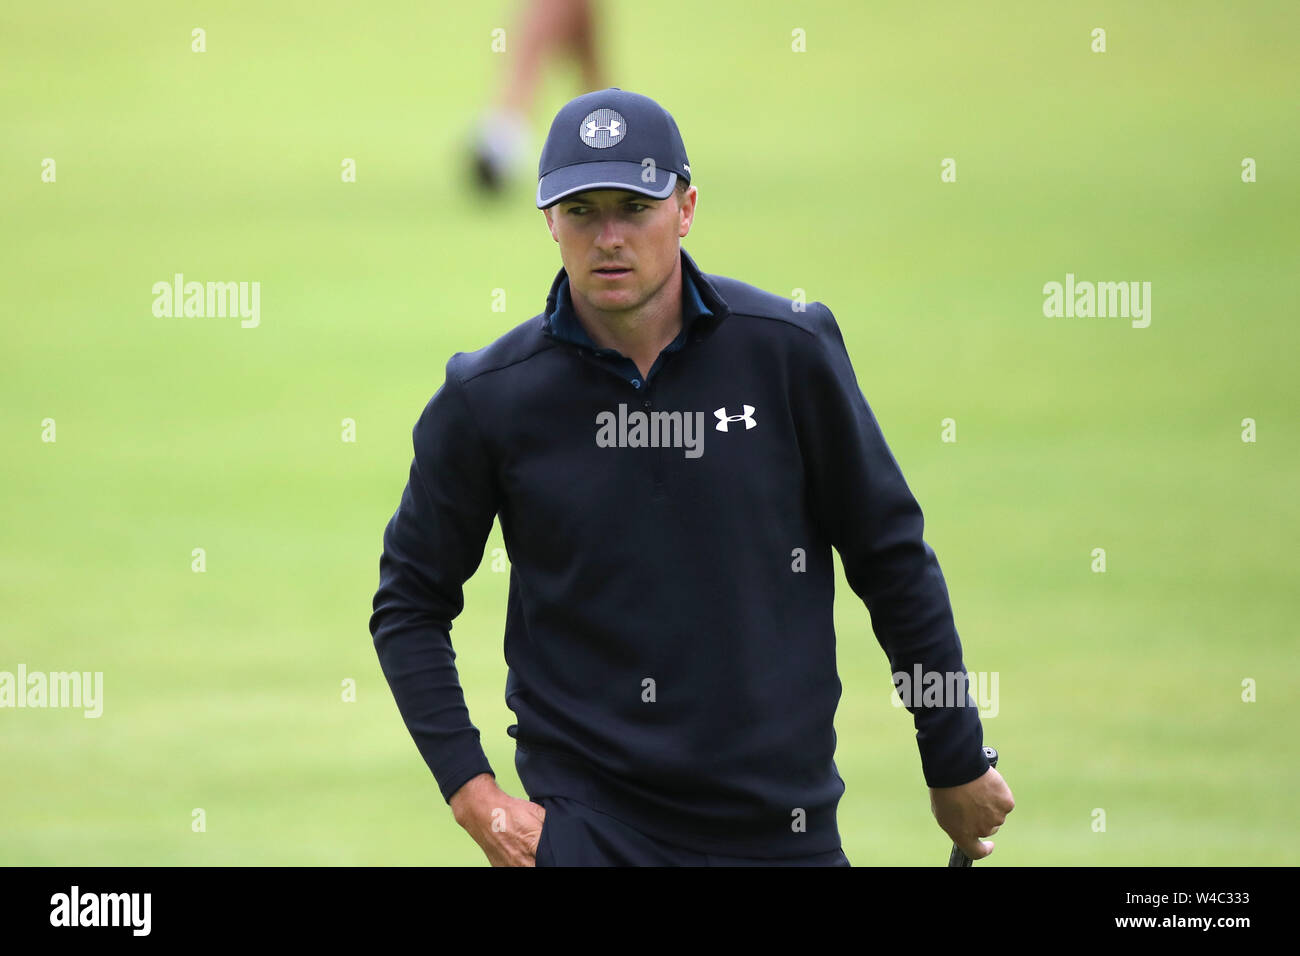 Royal Portrush, UK. 21st July, 2019. United States' Jordan Spieth on the 18th hole during the fourth round of the 148th British Open Championship at the Royal Portrush Golf Club in County Antrim, Northern Ireland, on July 21, 2019. Credit: Aflo Co. Ltd./Alamy Live News Stock Photo